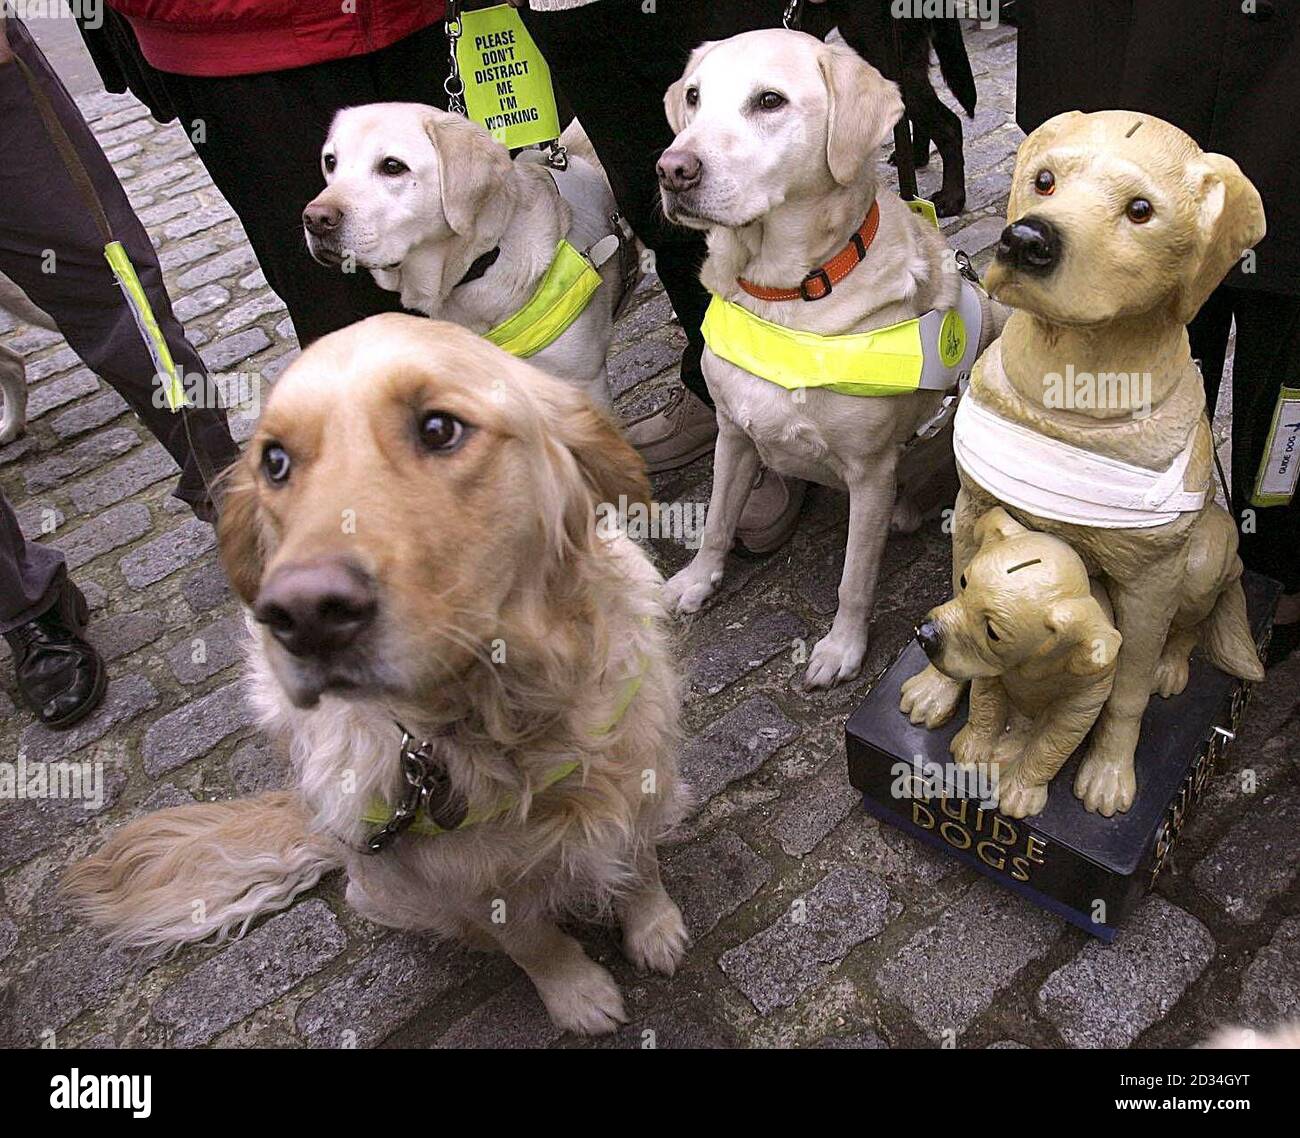 Working guide dogs accompany their owners to surround a Guide Dogs' collection box, Thursday January 26, 2006. A new interactive exhibition called 'Moving Forward Together' was launched today, commemorating 75 years since the first guide dogs began working in Britain, on the Isle of Dogs in London's Docklands. PRESS ASSOCIATION Photo. Photo gredit should read: Jane Mingay/PA Stock Photo